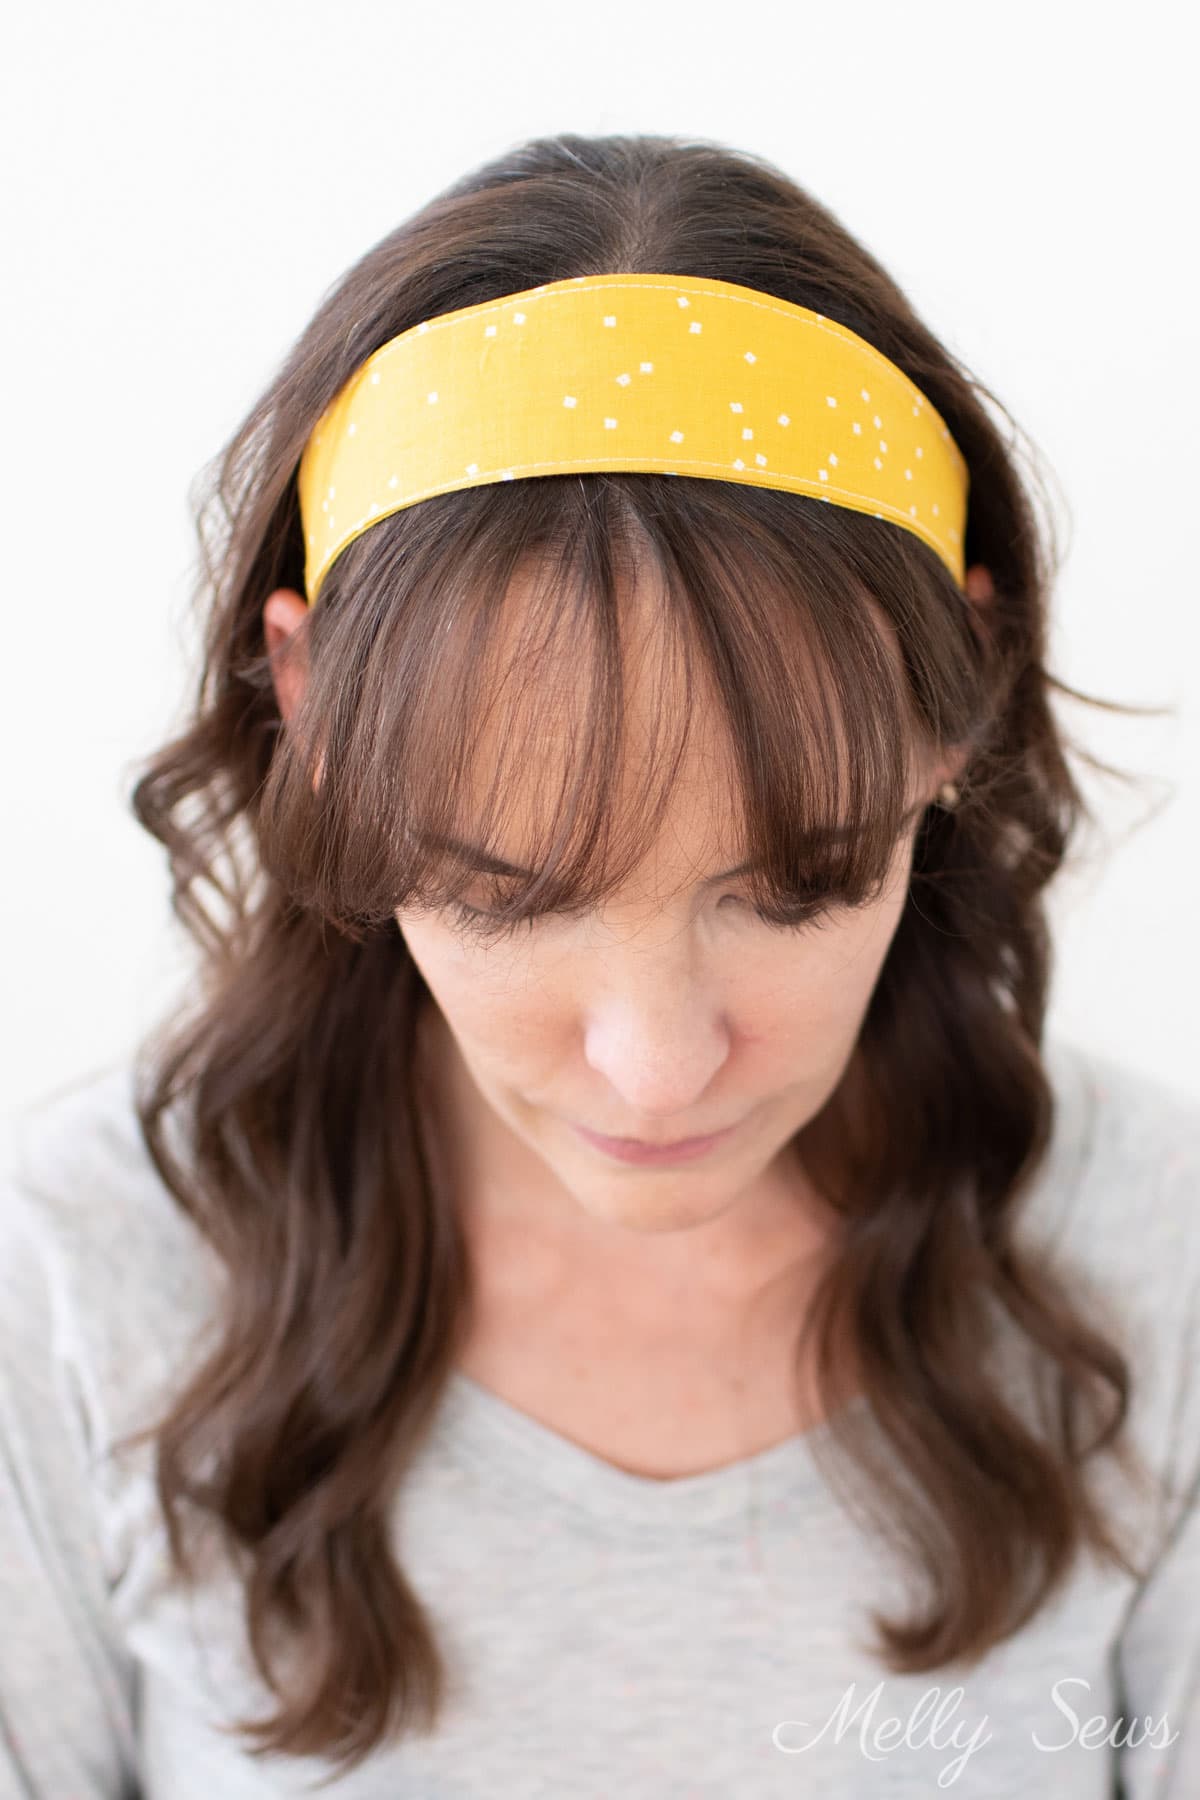 How to Make a Fabric Headband Tutorial with Free Pattern - Melly Sews